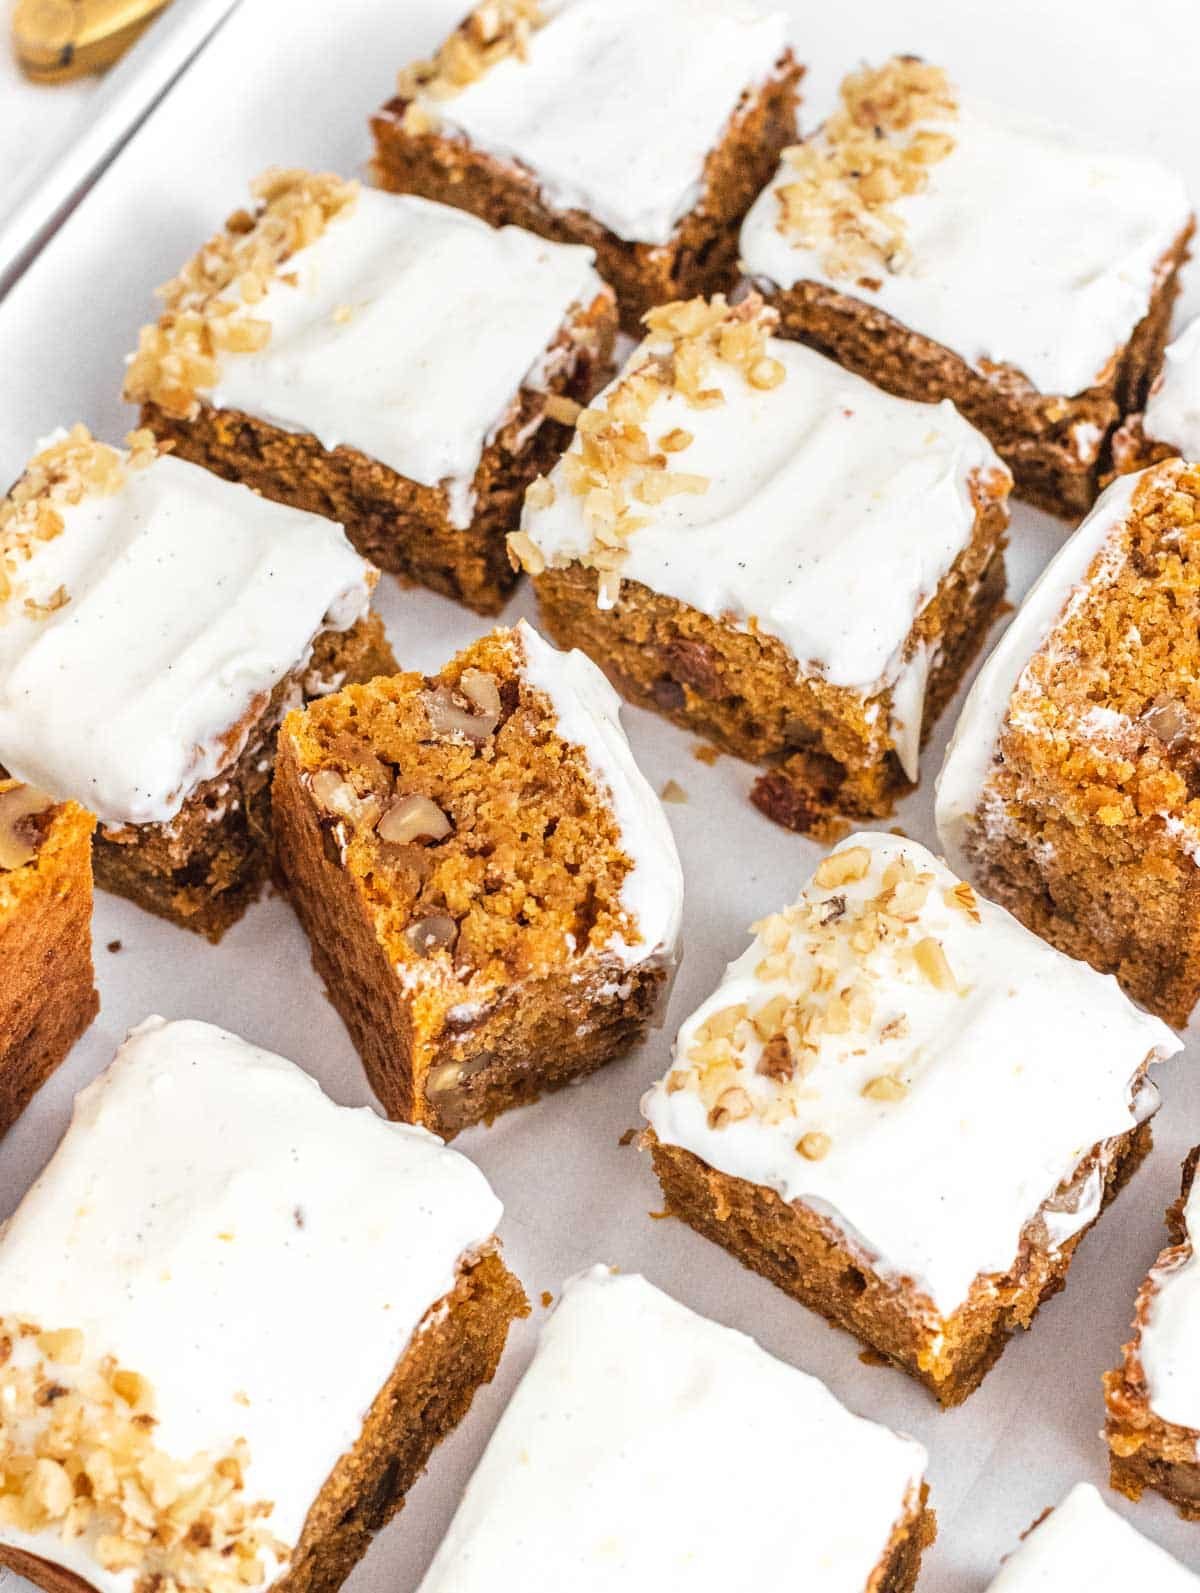 Carrot cake with frosting and walnuts